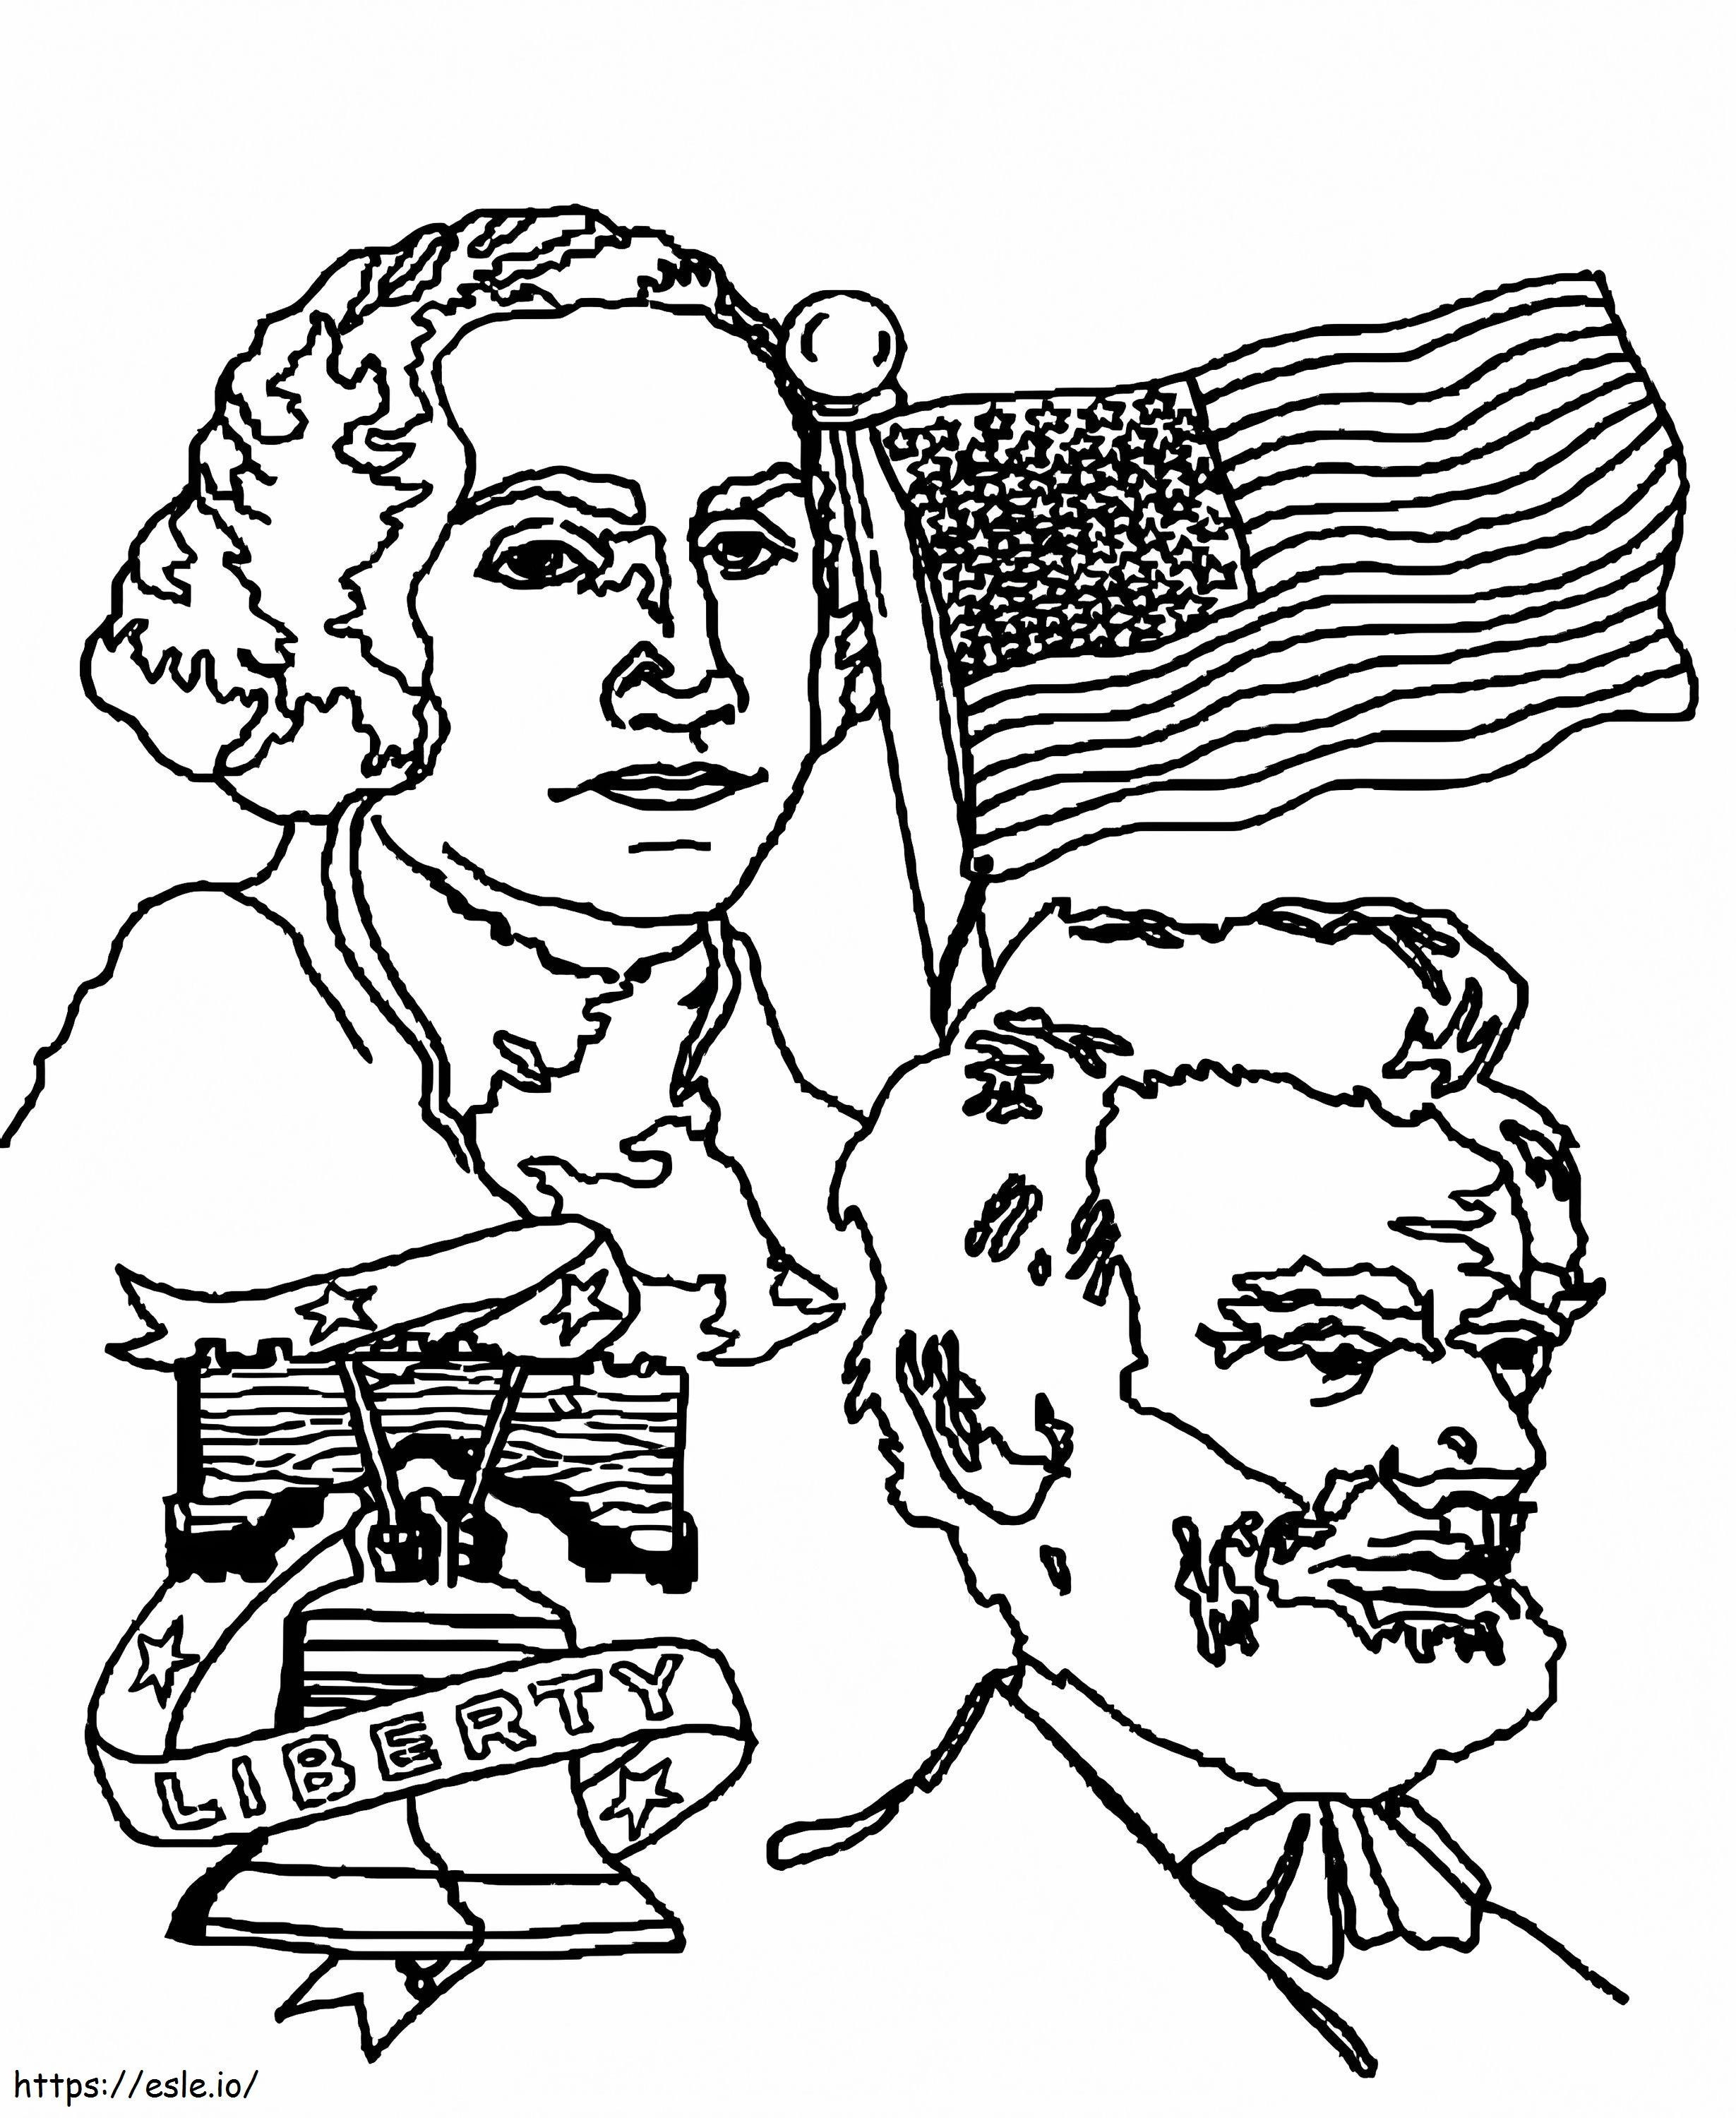 Washington And Lincoln Presidents Day 1 coloring page